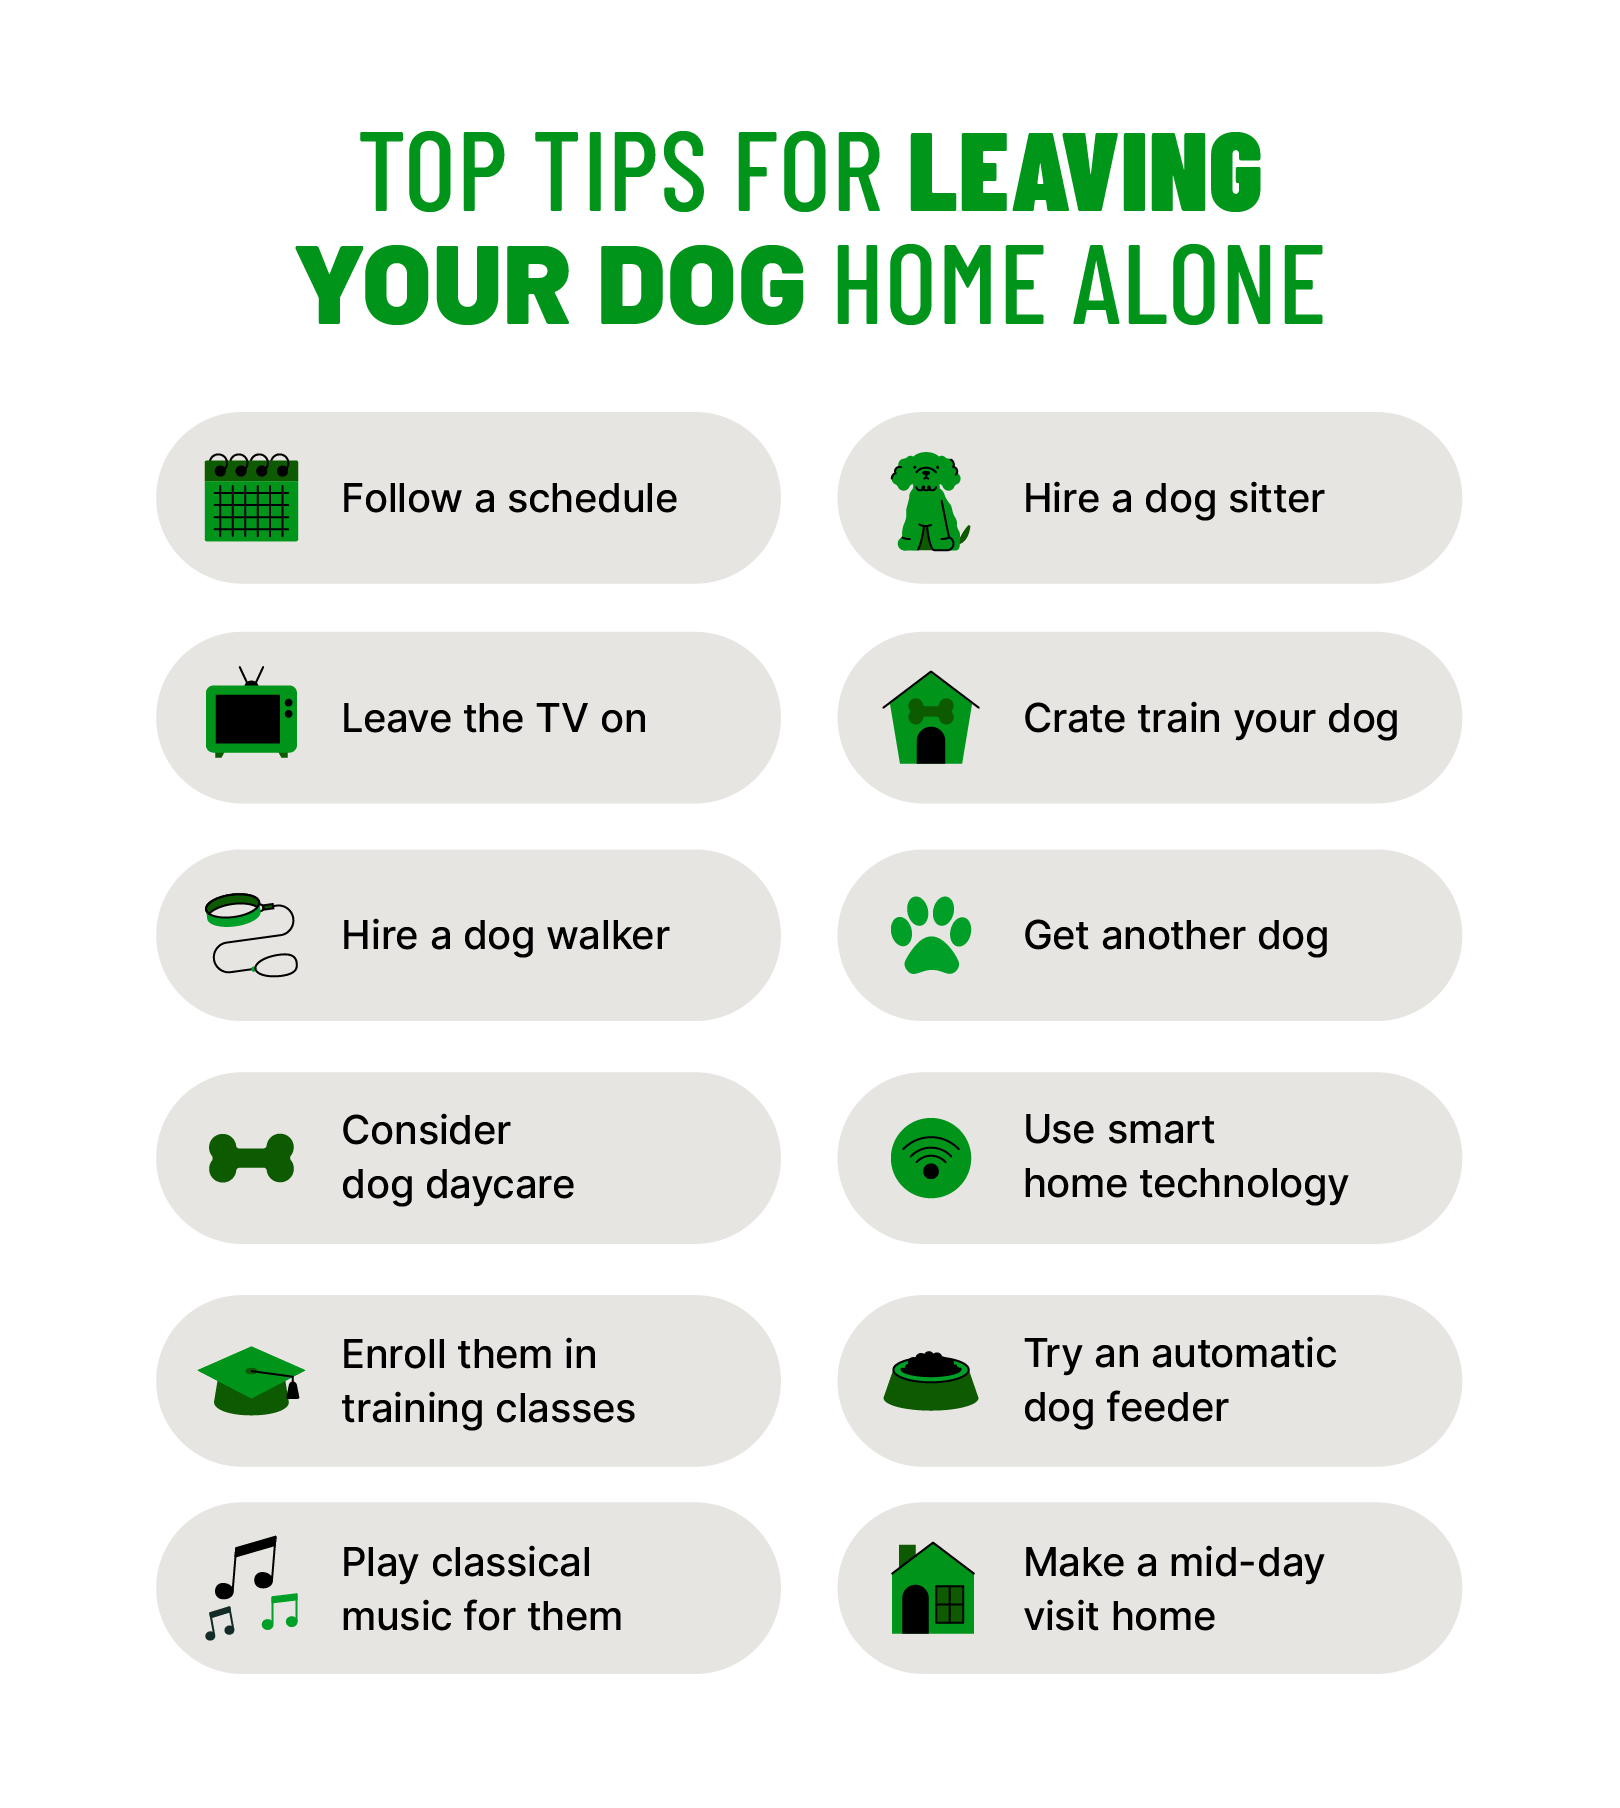 12 tips for leaving your dog home alone